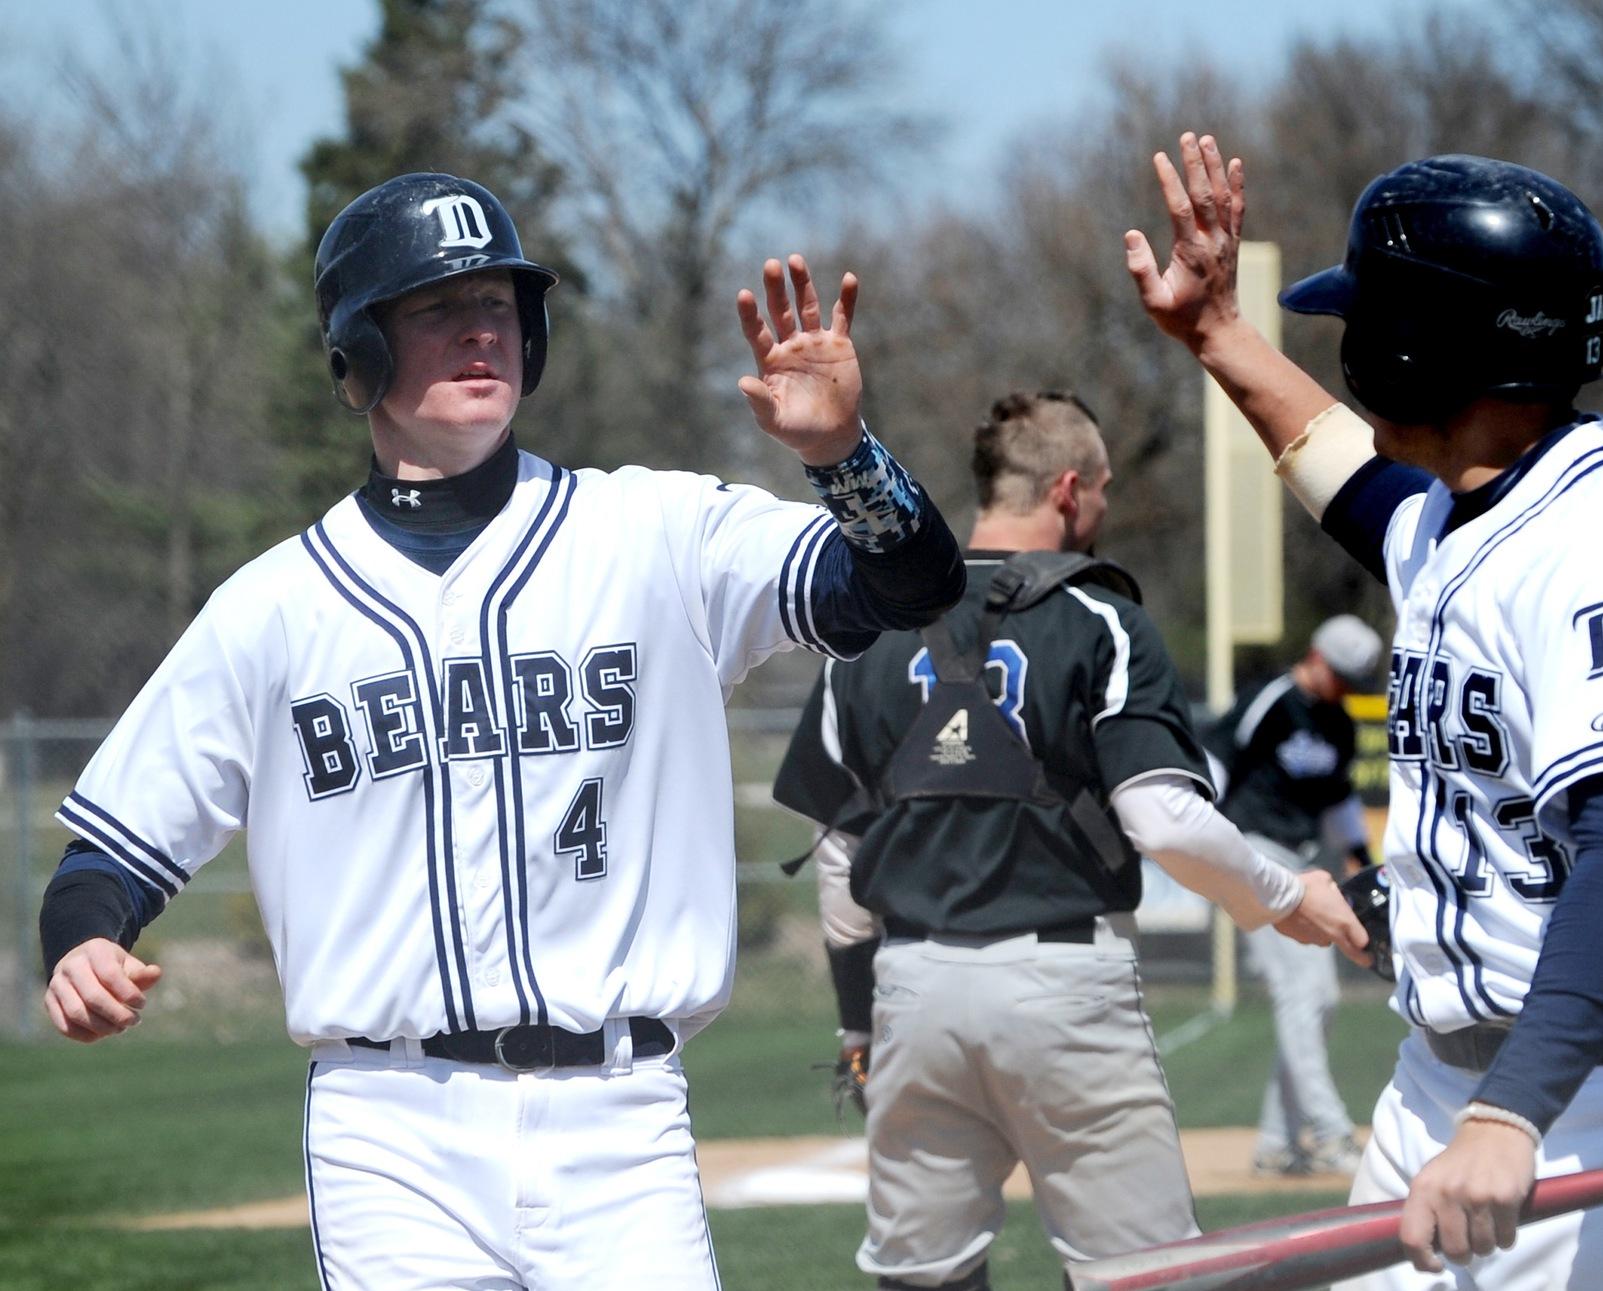 DMACC BASEBALL TEAM SPLITS FOUR-GAME SERIES WITH ICCC